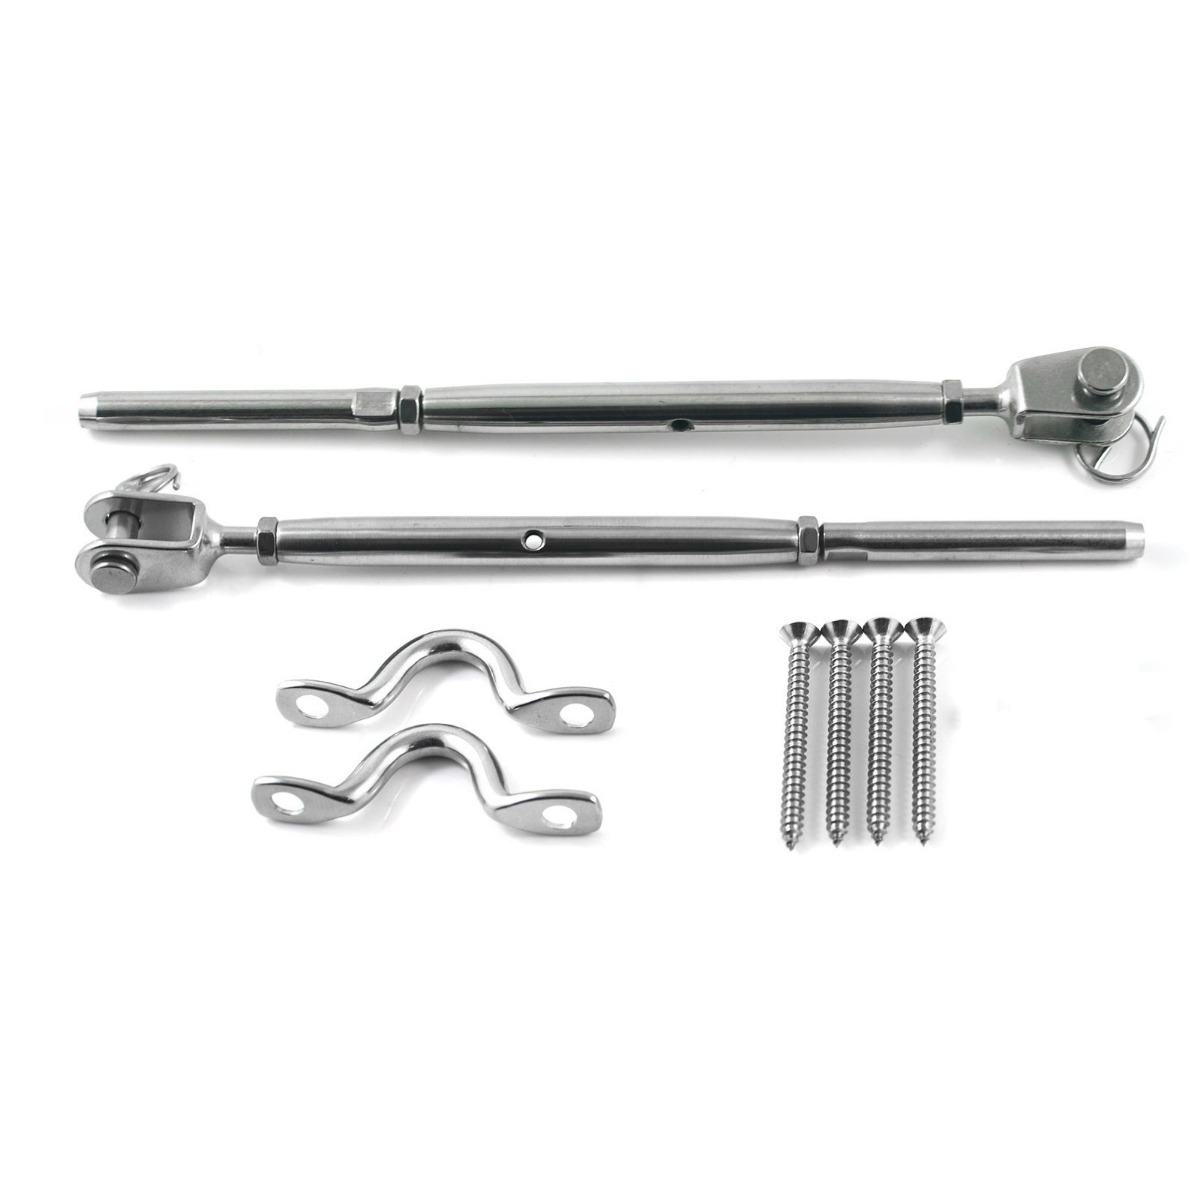 Jaw/Swage Bottlescrew Stainless for 4.0mm Wire Balustrade Kit #404